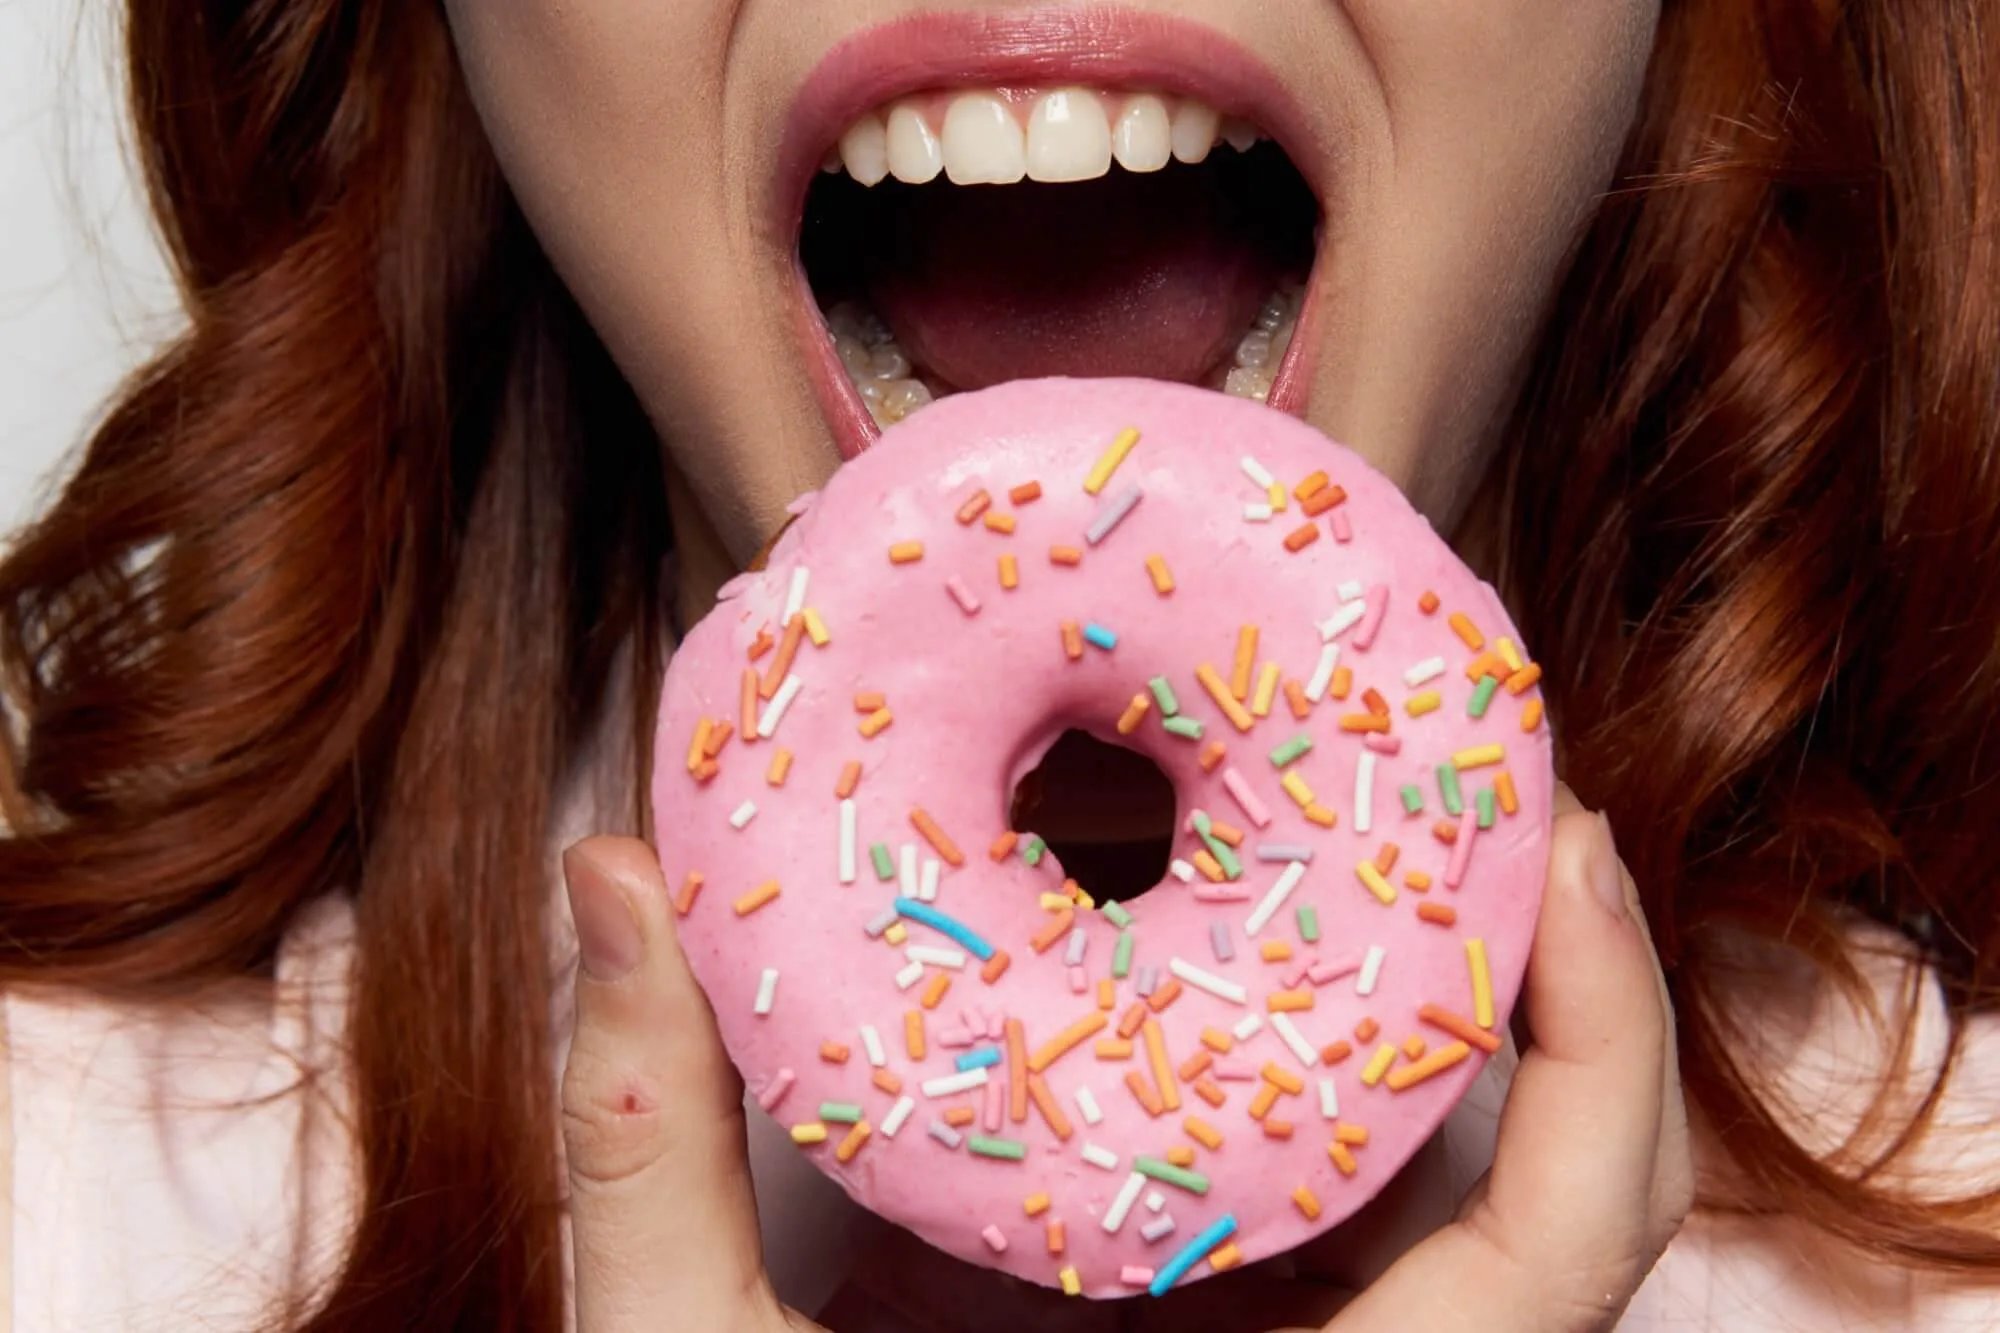 10 Effective Supplements to Curb Sugar Cravings and Support a Healthy Lifestyle